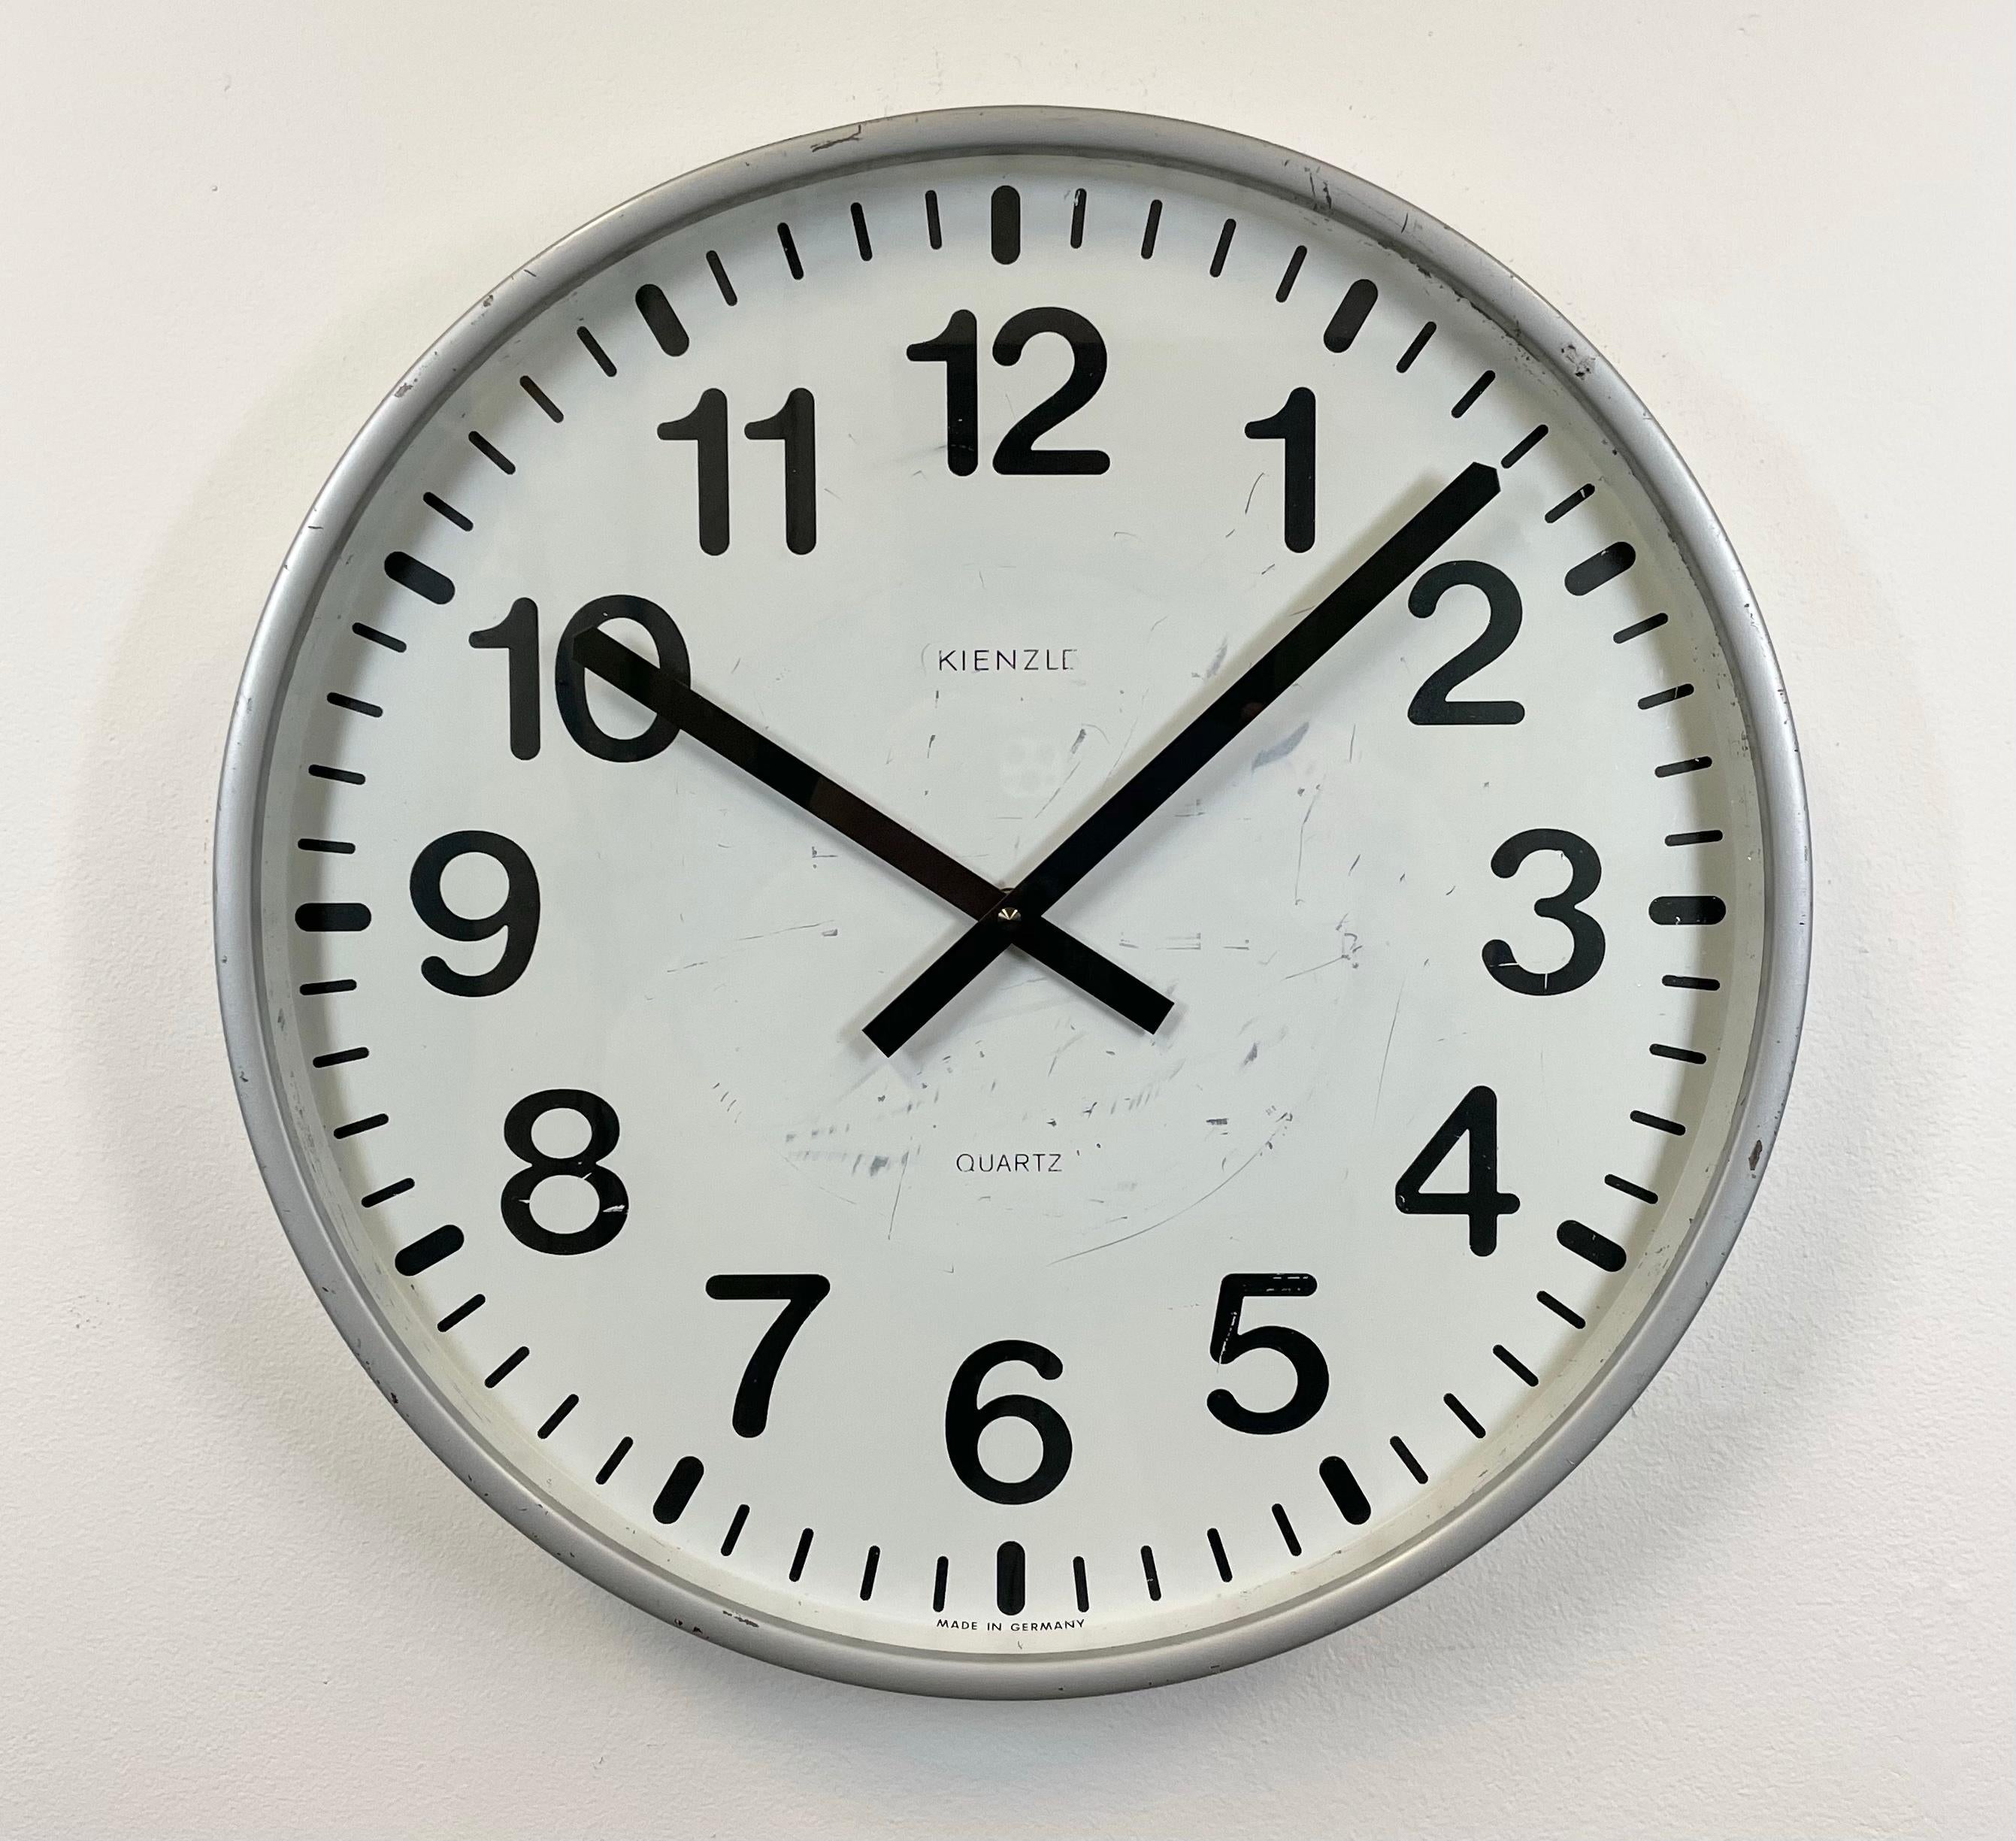 Vintage Industrial wall clock made by Kienzle in Germany during the 1980s. It features a grey iron frame, a white metal dial, an aluminium hands and a clear glass cover. The piece has been converted into a battery-powered clockwork and requires only